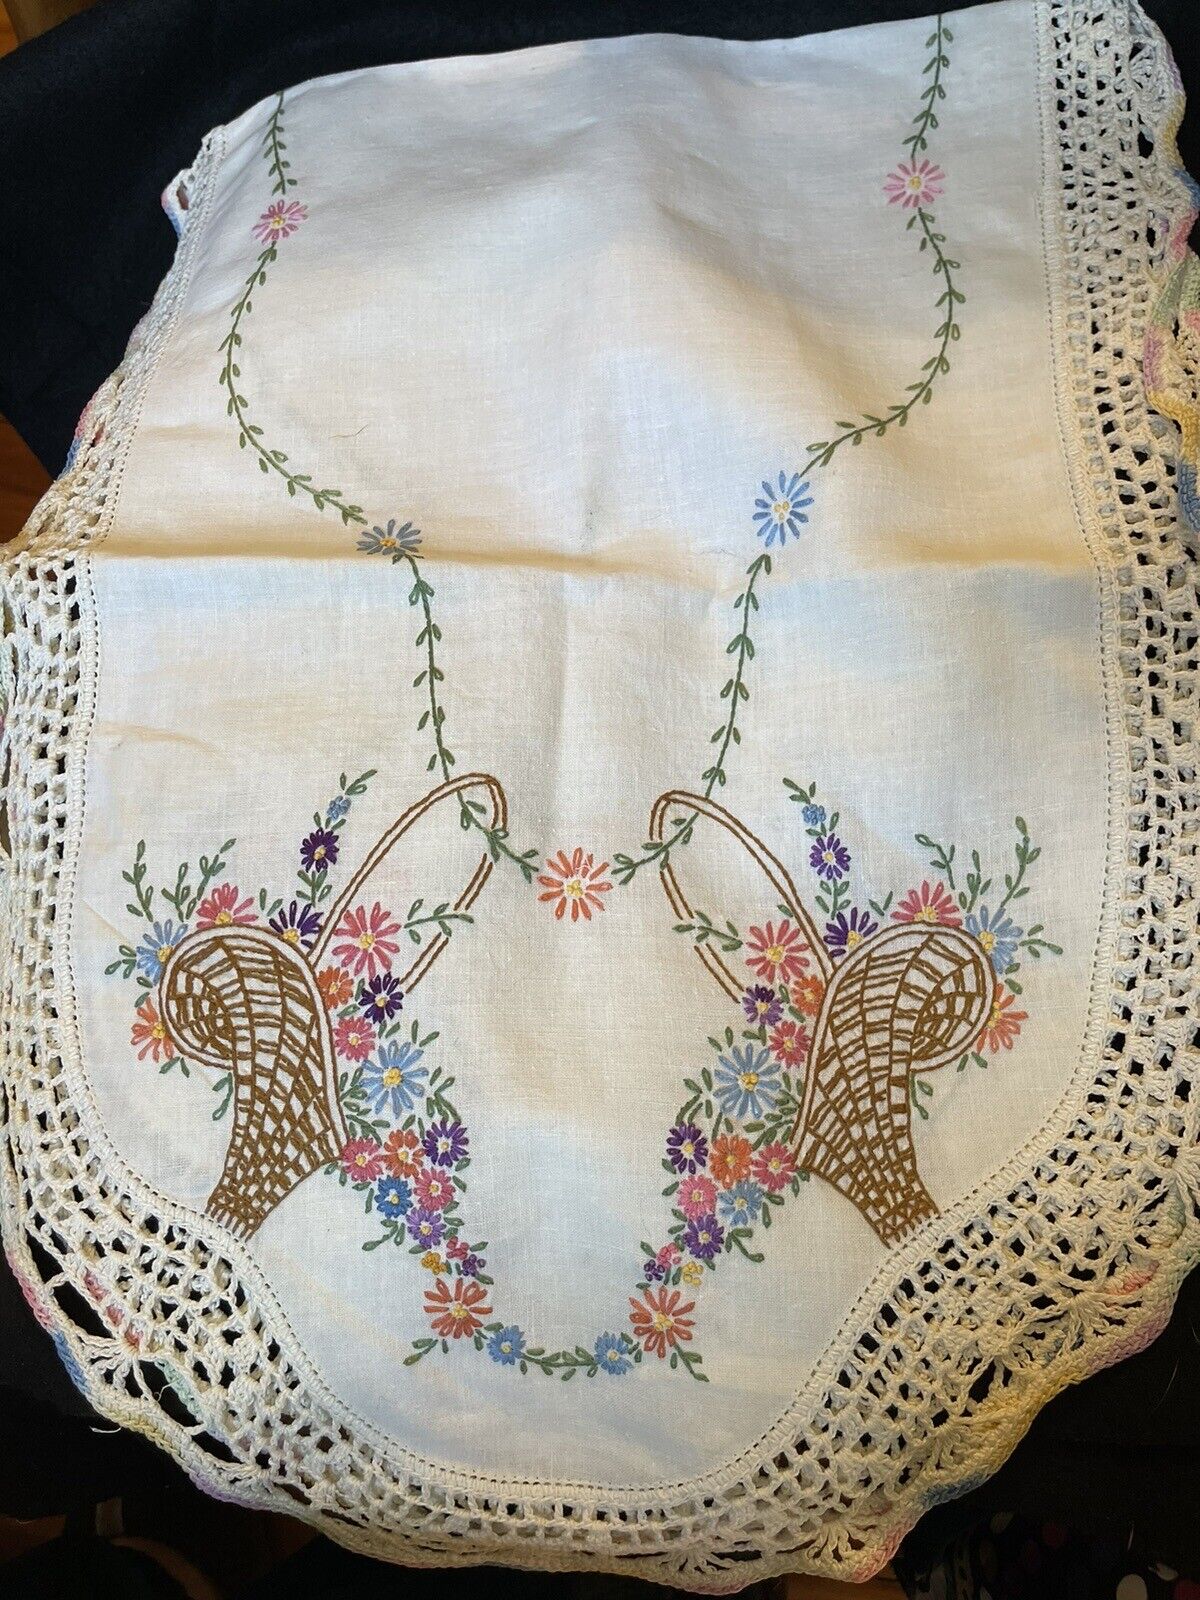 Vintage Handmade Embroidered Floral Basket Table Runner  With Crocheted Edging